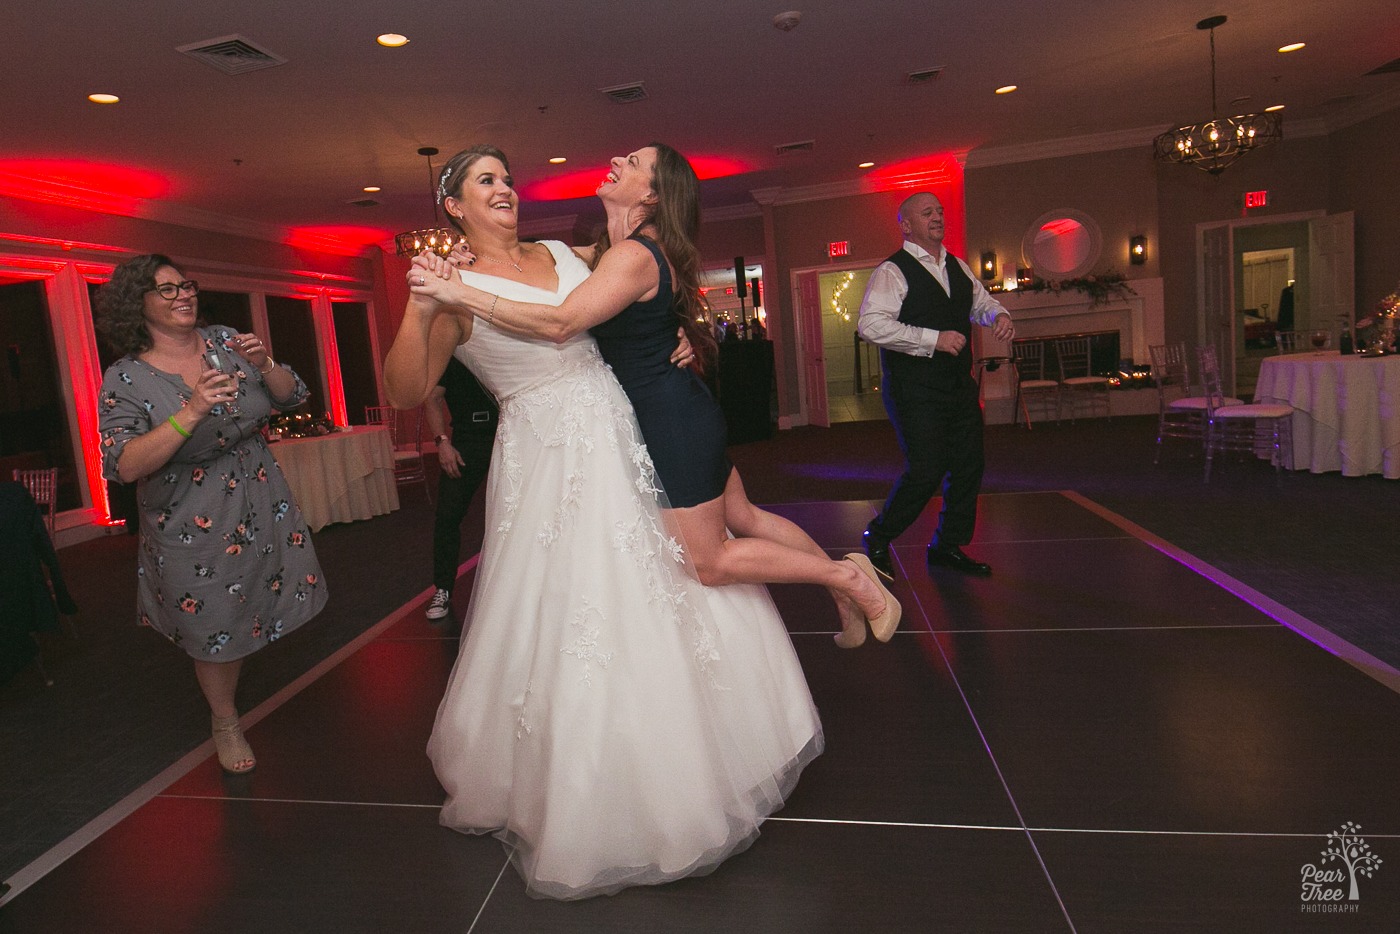 Tall bride lifting and spinning a much shorter friend around the dance floor